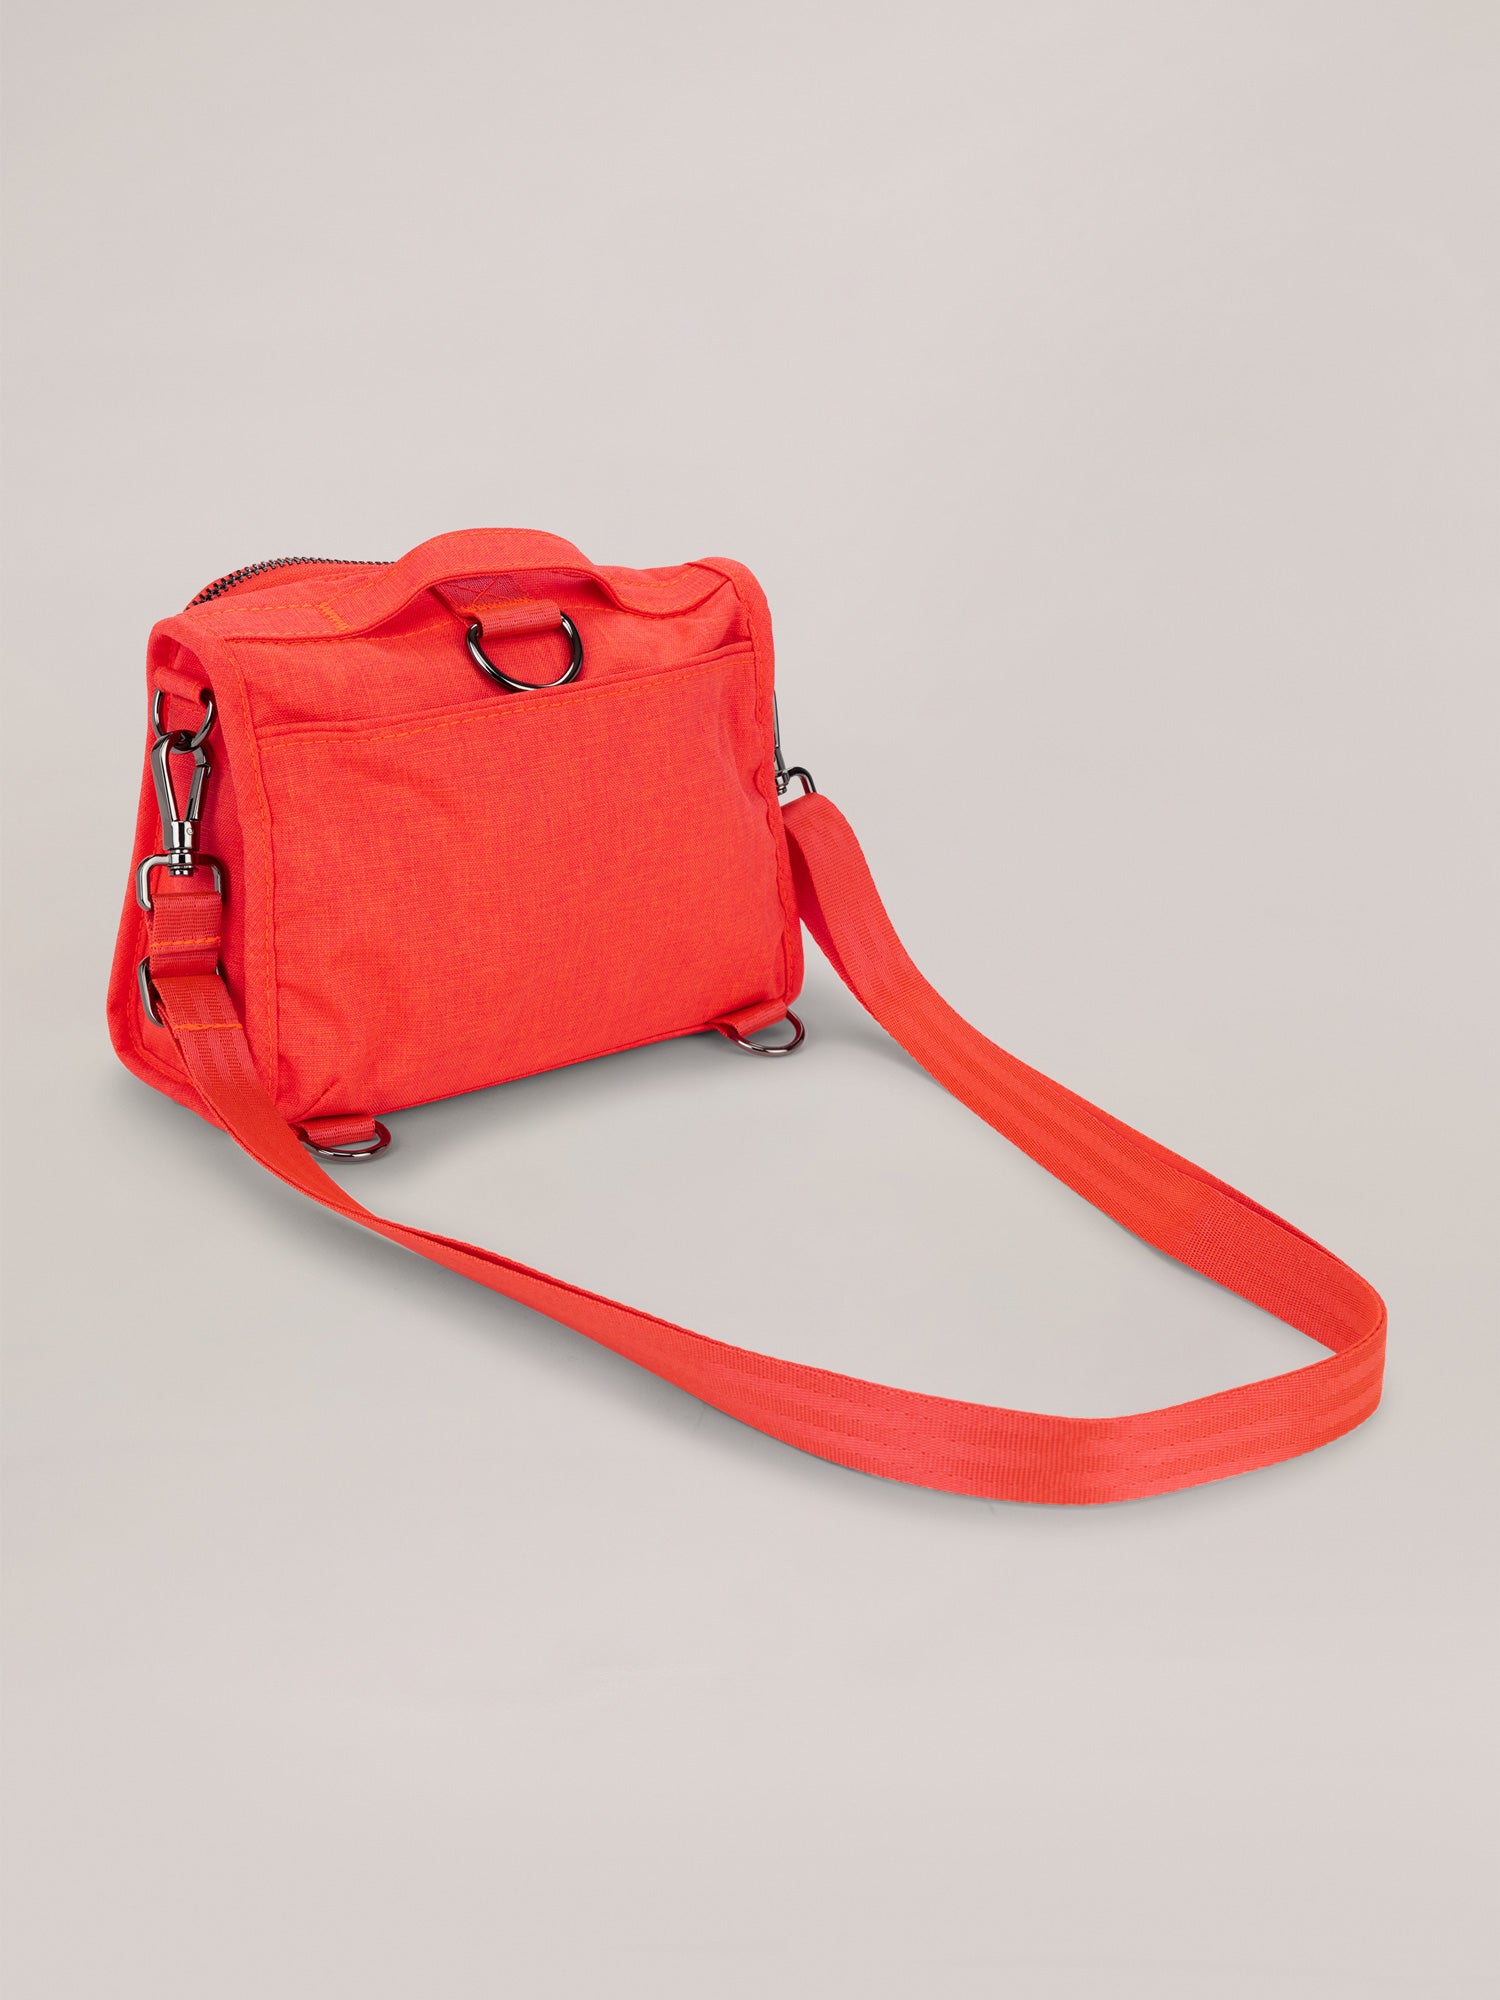 Neon Coral Pink Mini B.F.F. Crossbody Bag Quarter Angle Back View with Strap